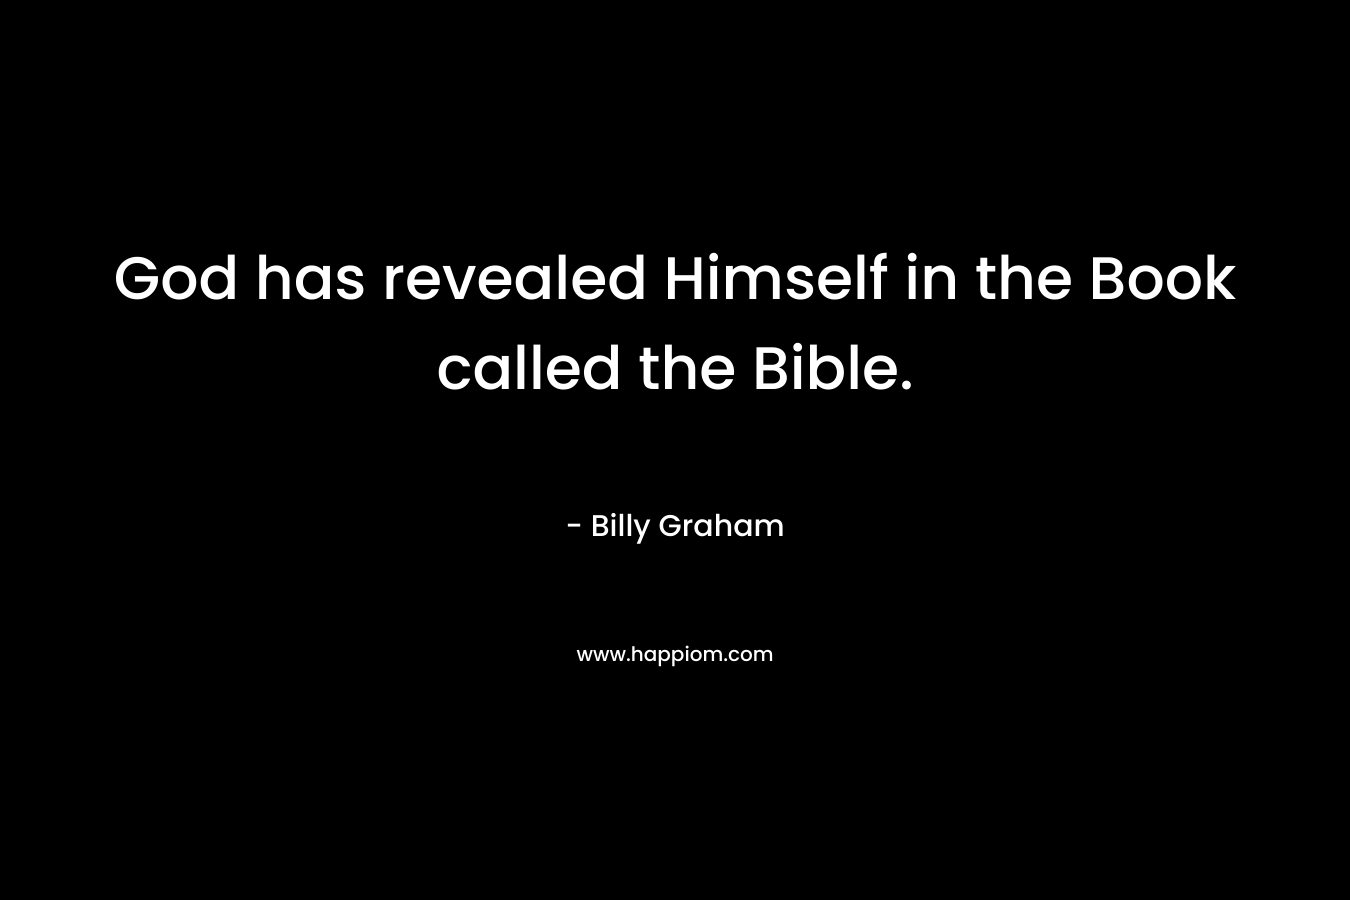 God has revealed Himself in the Book called the Bible. – Billy Graham